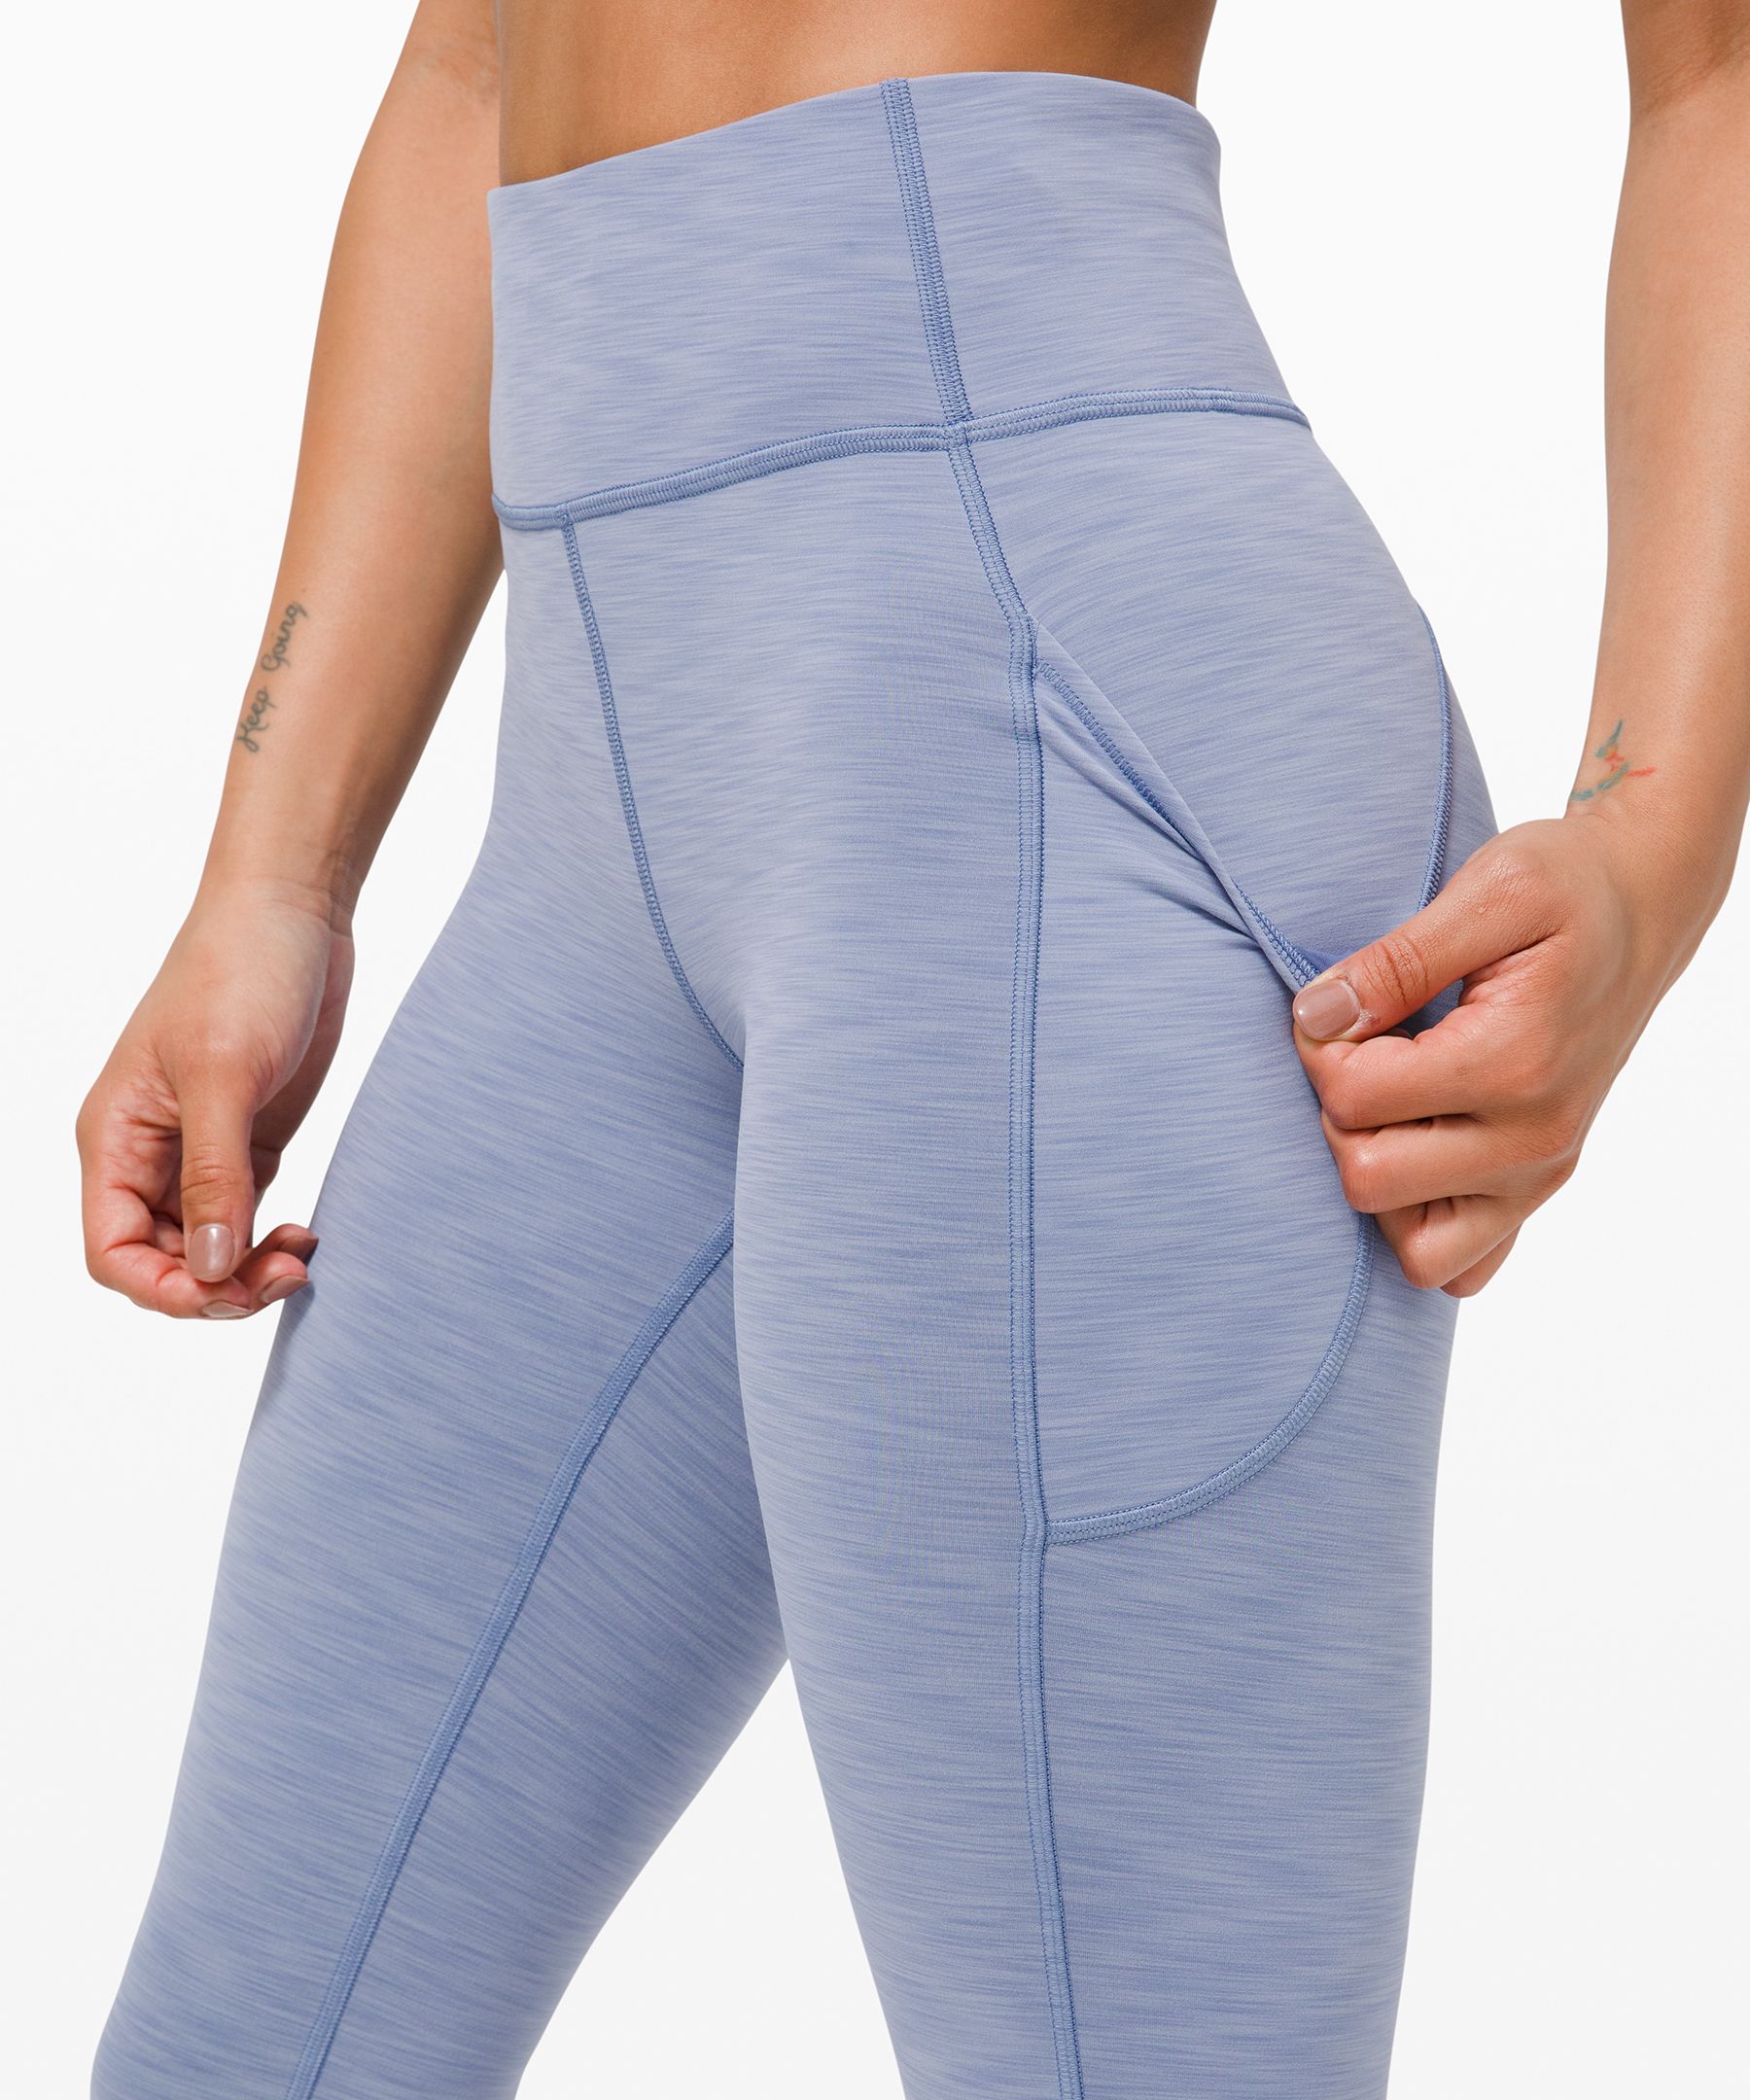 NWT Lululemon Invigorate High-Rise Tight 25 ~SIZE:2,4,6~MORE COLORS